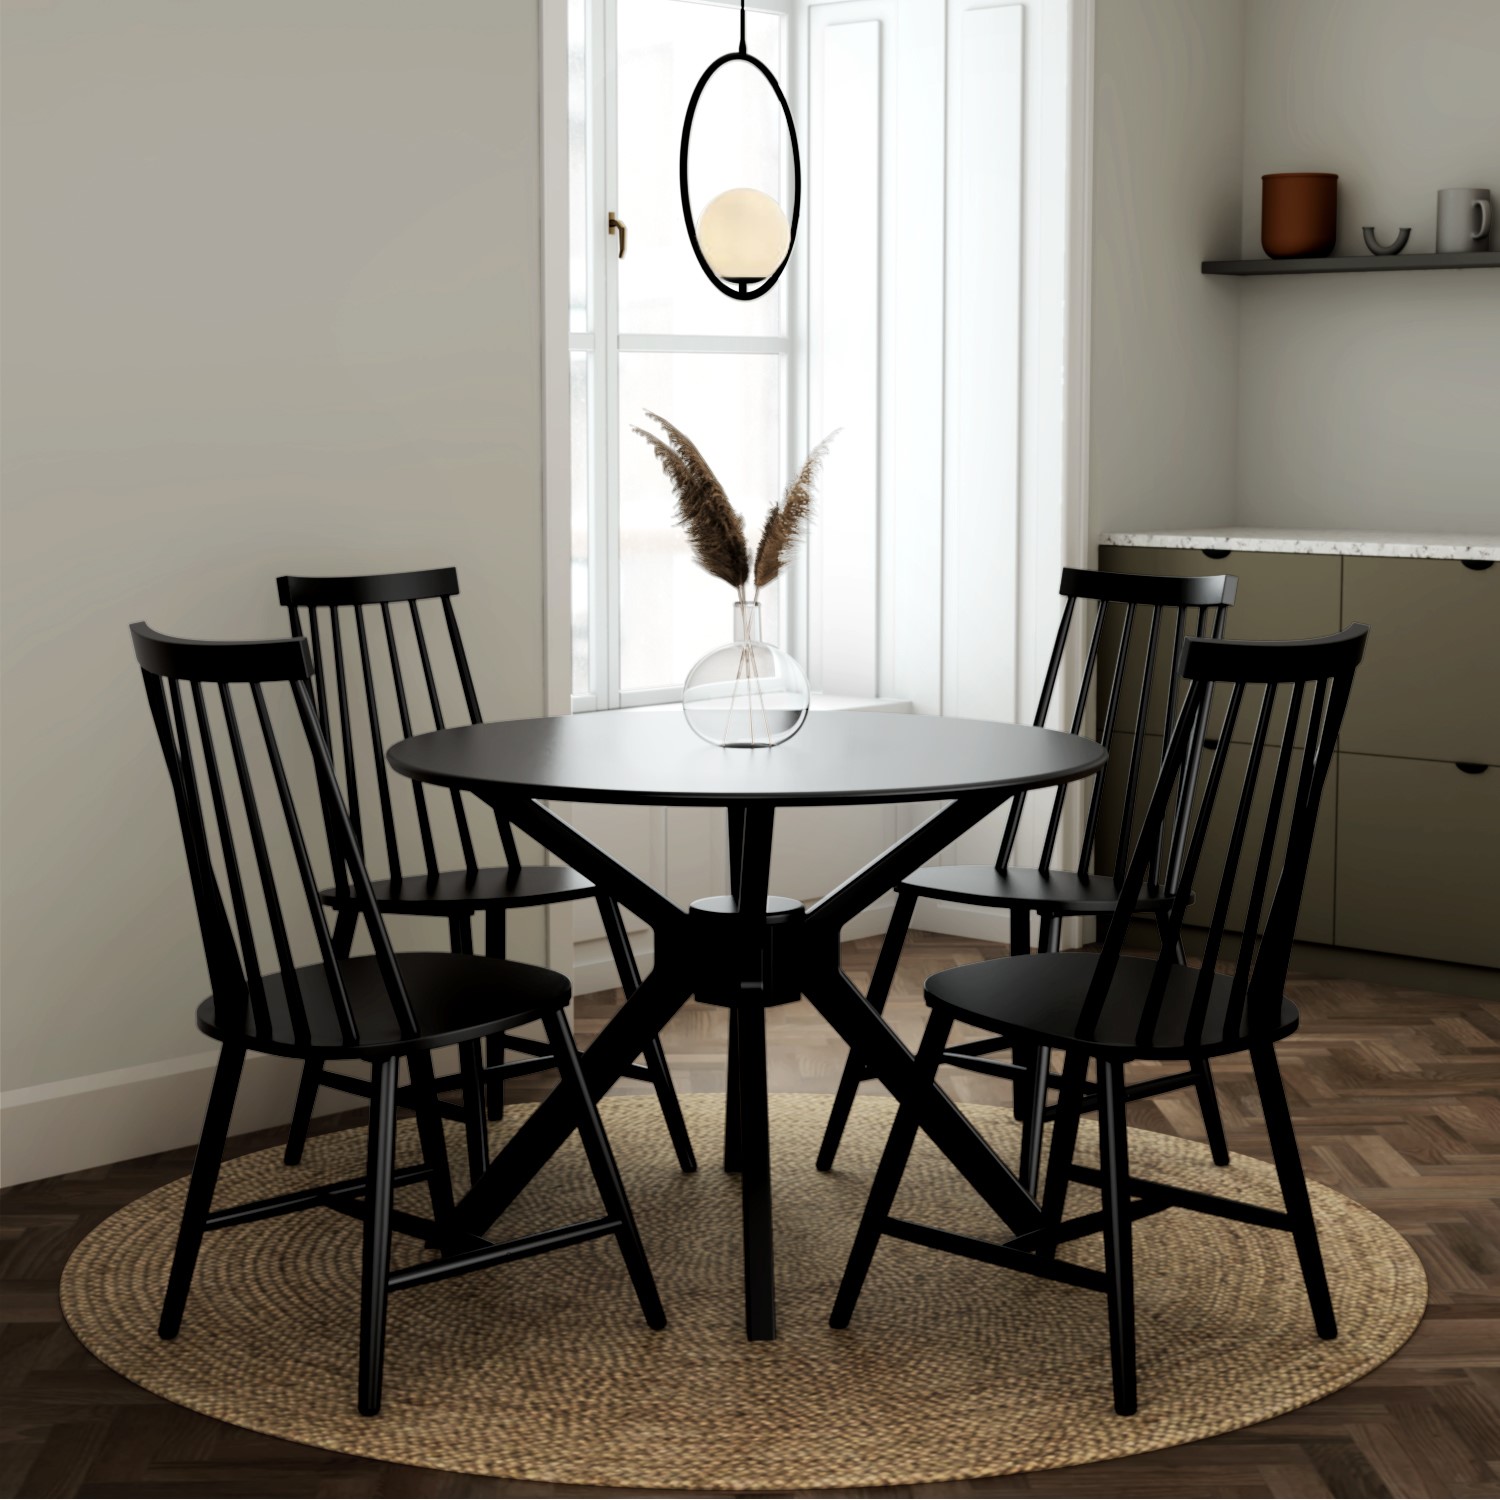 Photo of 4 seater round black dining set with 4 black spindle dining chairs - karie